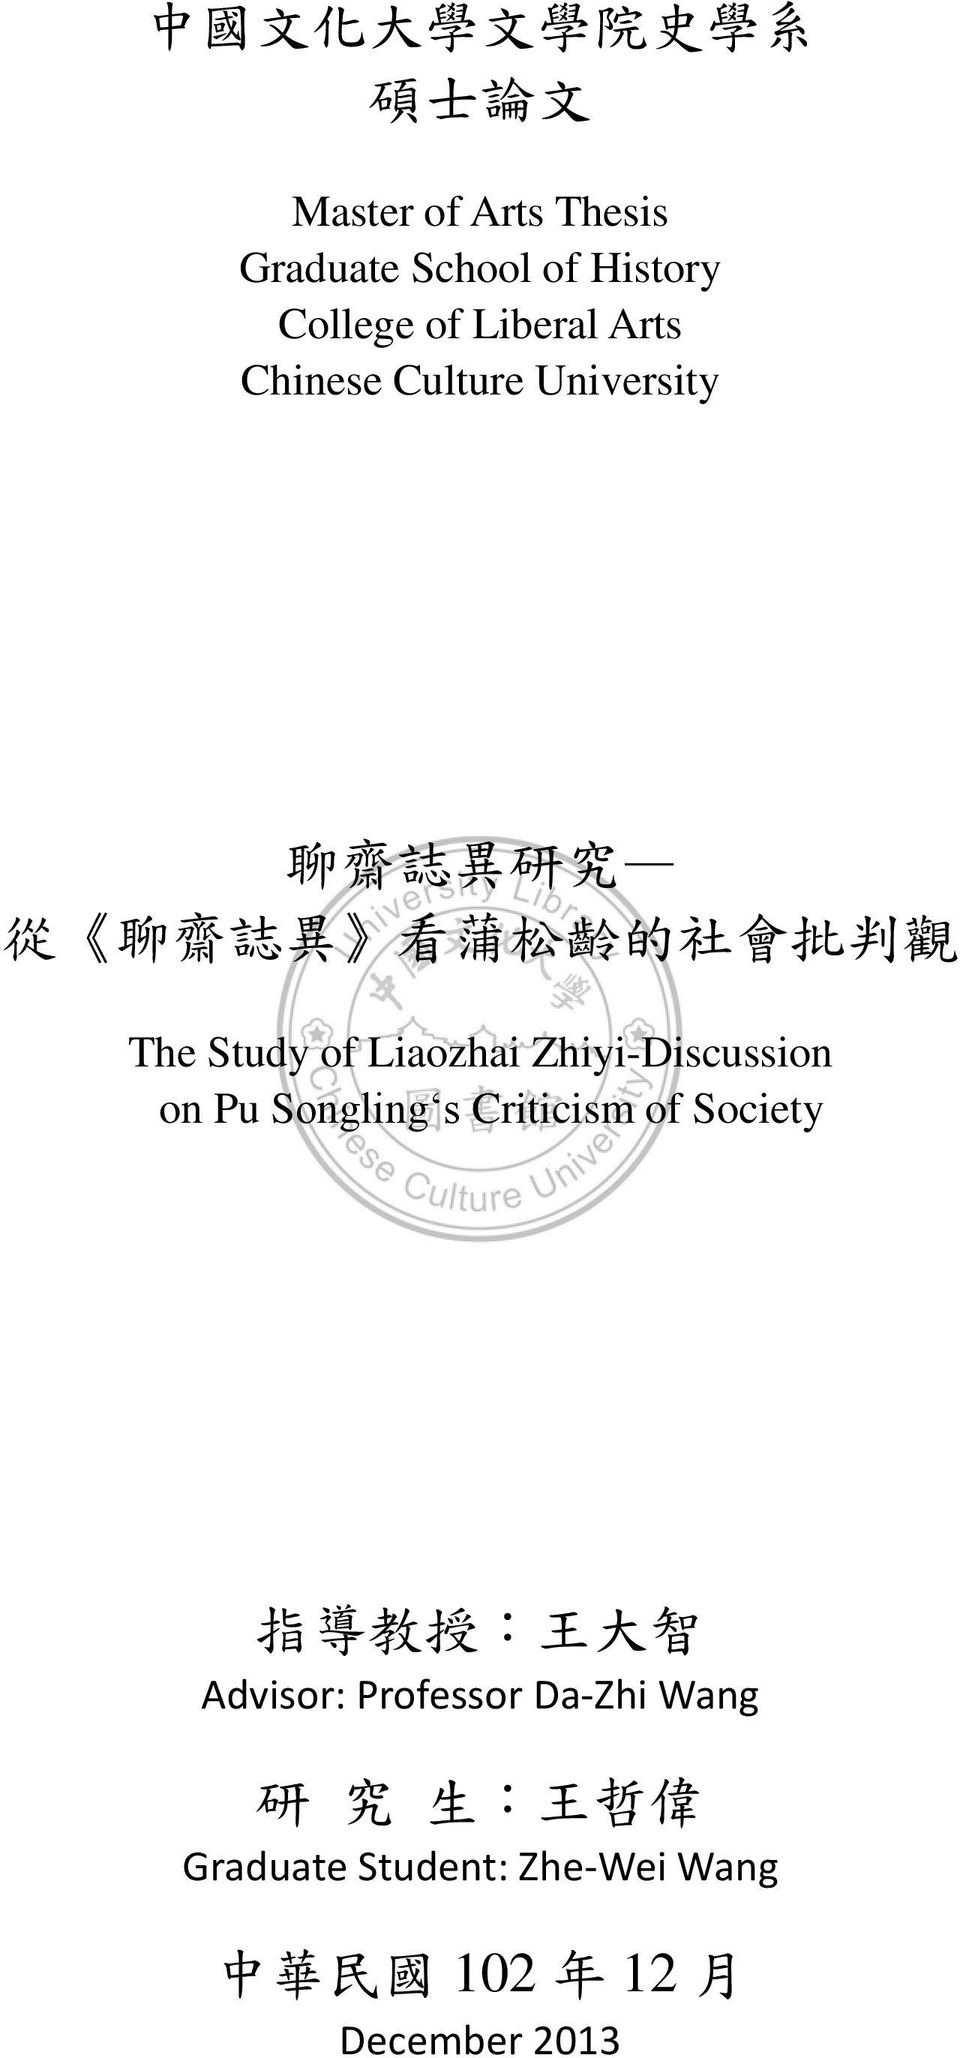 of Liaozhai Zhiyi-Discussion on Pu Songling s Criticism of Society 指 導 教 授 : 王 大 智 Advisor: